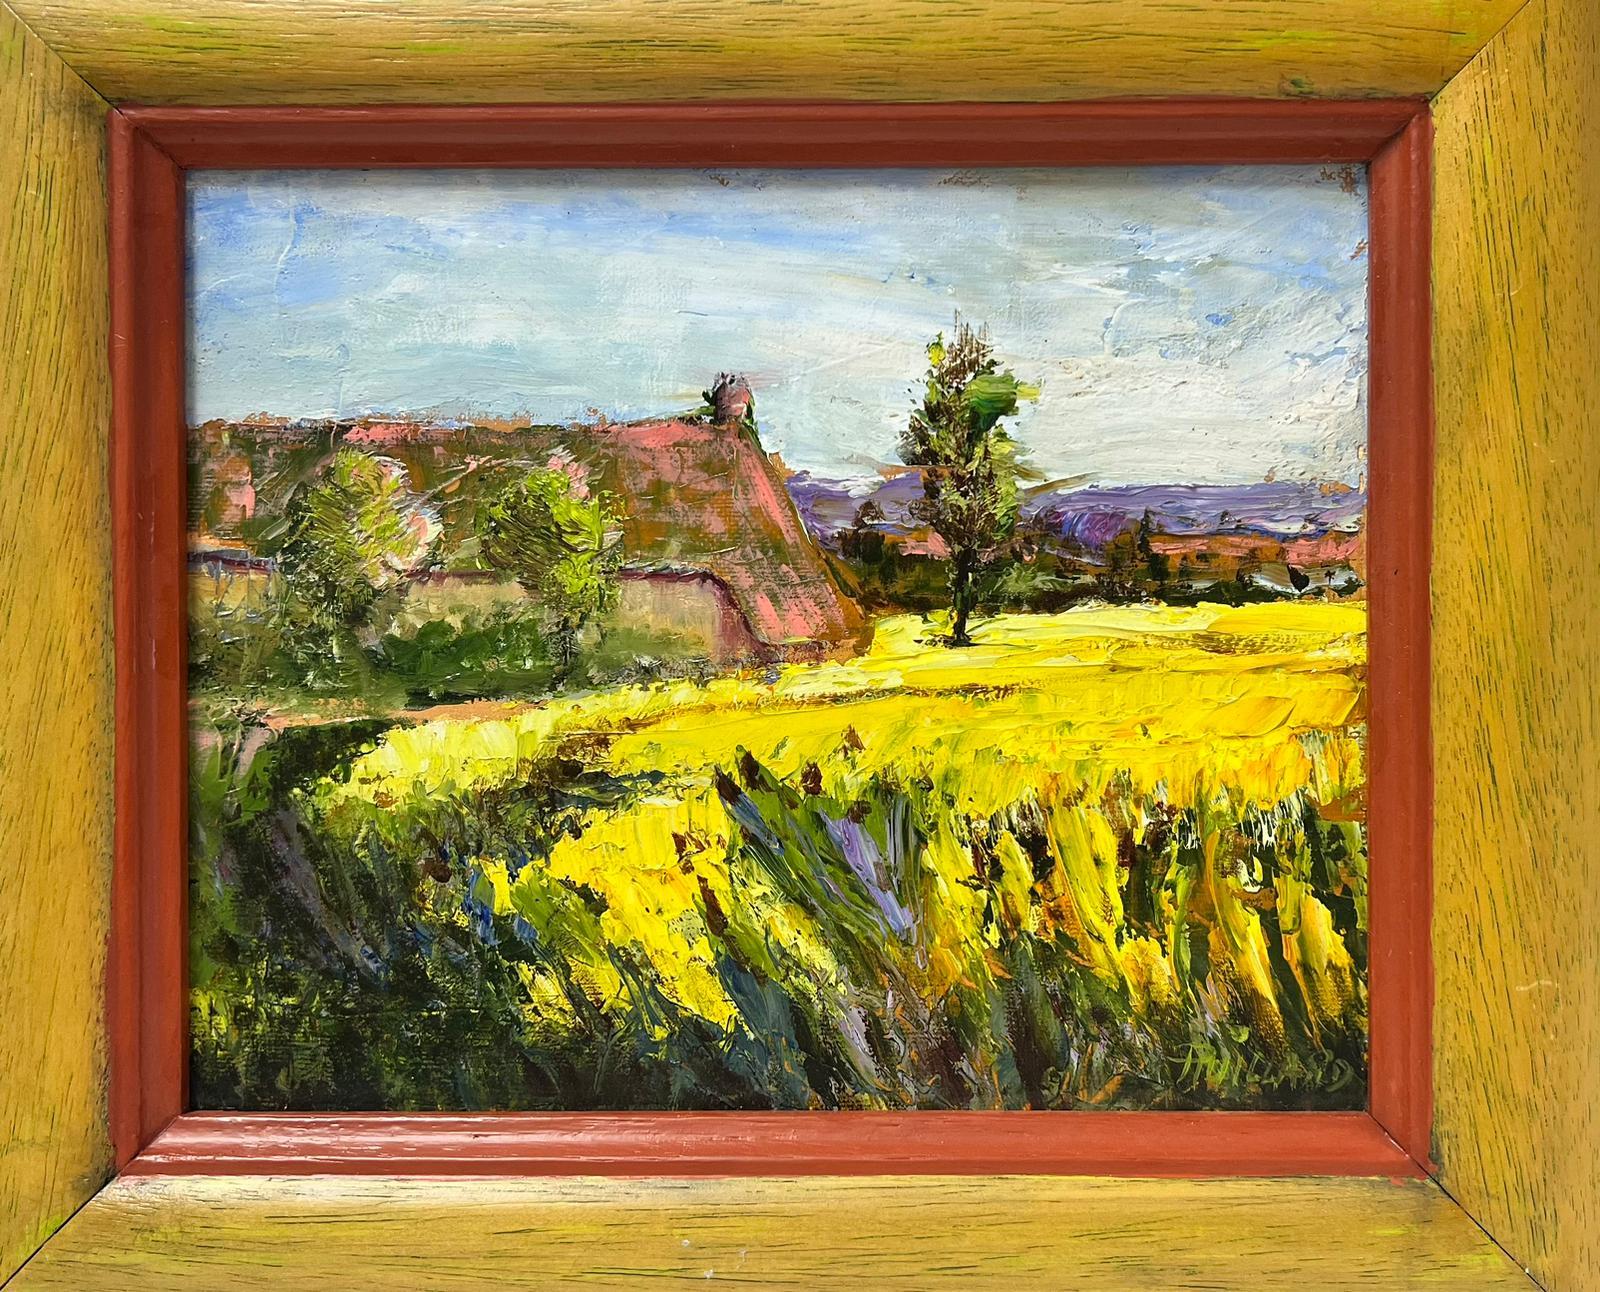 French Mid 20th Century Post Impressionist artist
signed indistinctly, 
oil painting on canvas, framed
framed: 12.5 x 14.5 inches
painting: 8 x 10 inches
provenance: private collection, France
condition: very good and sound condition 
